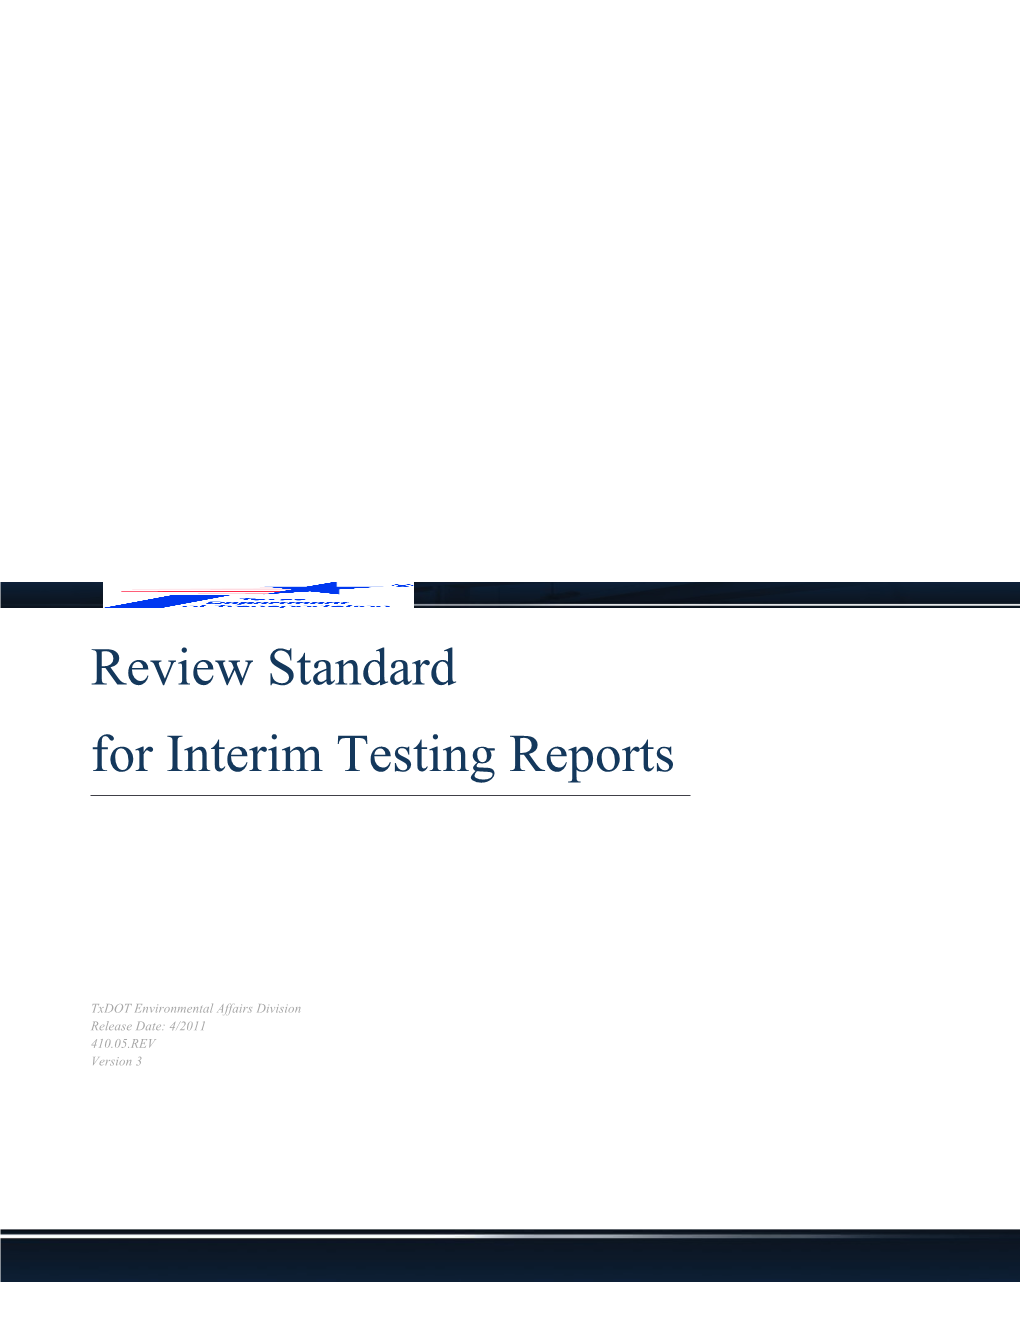 Review Standard for Interim Testing Reports